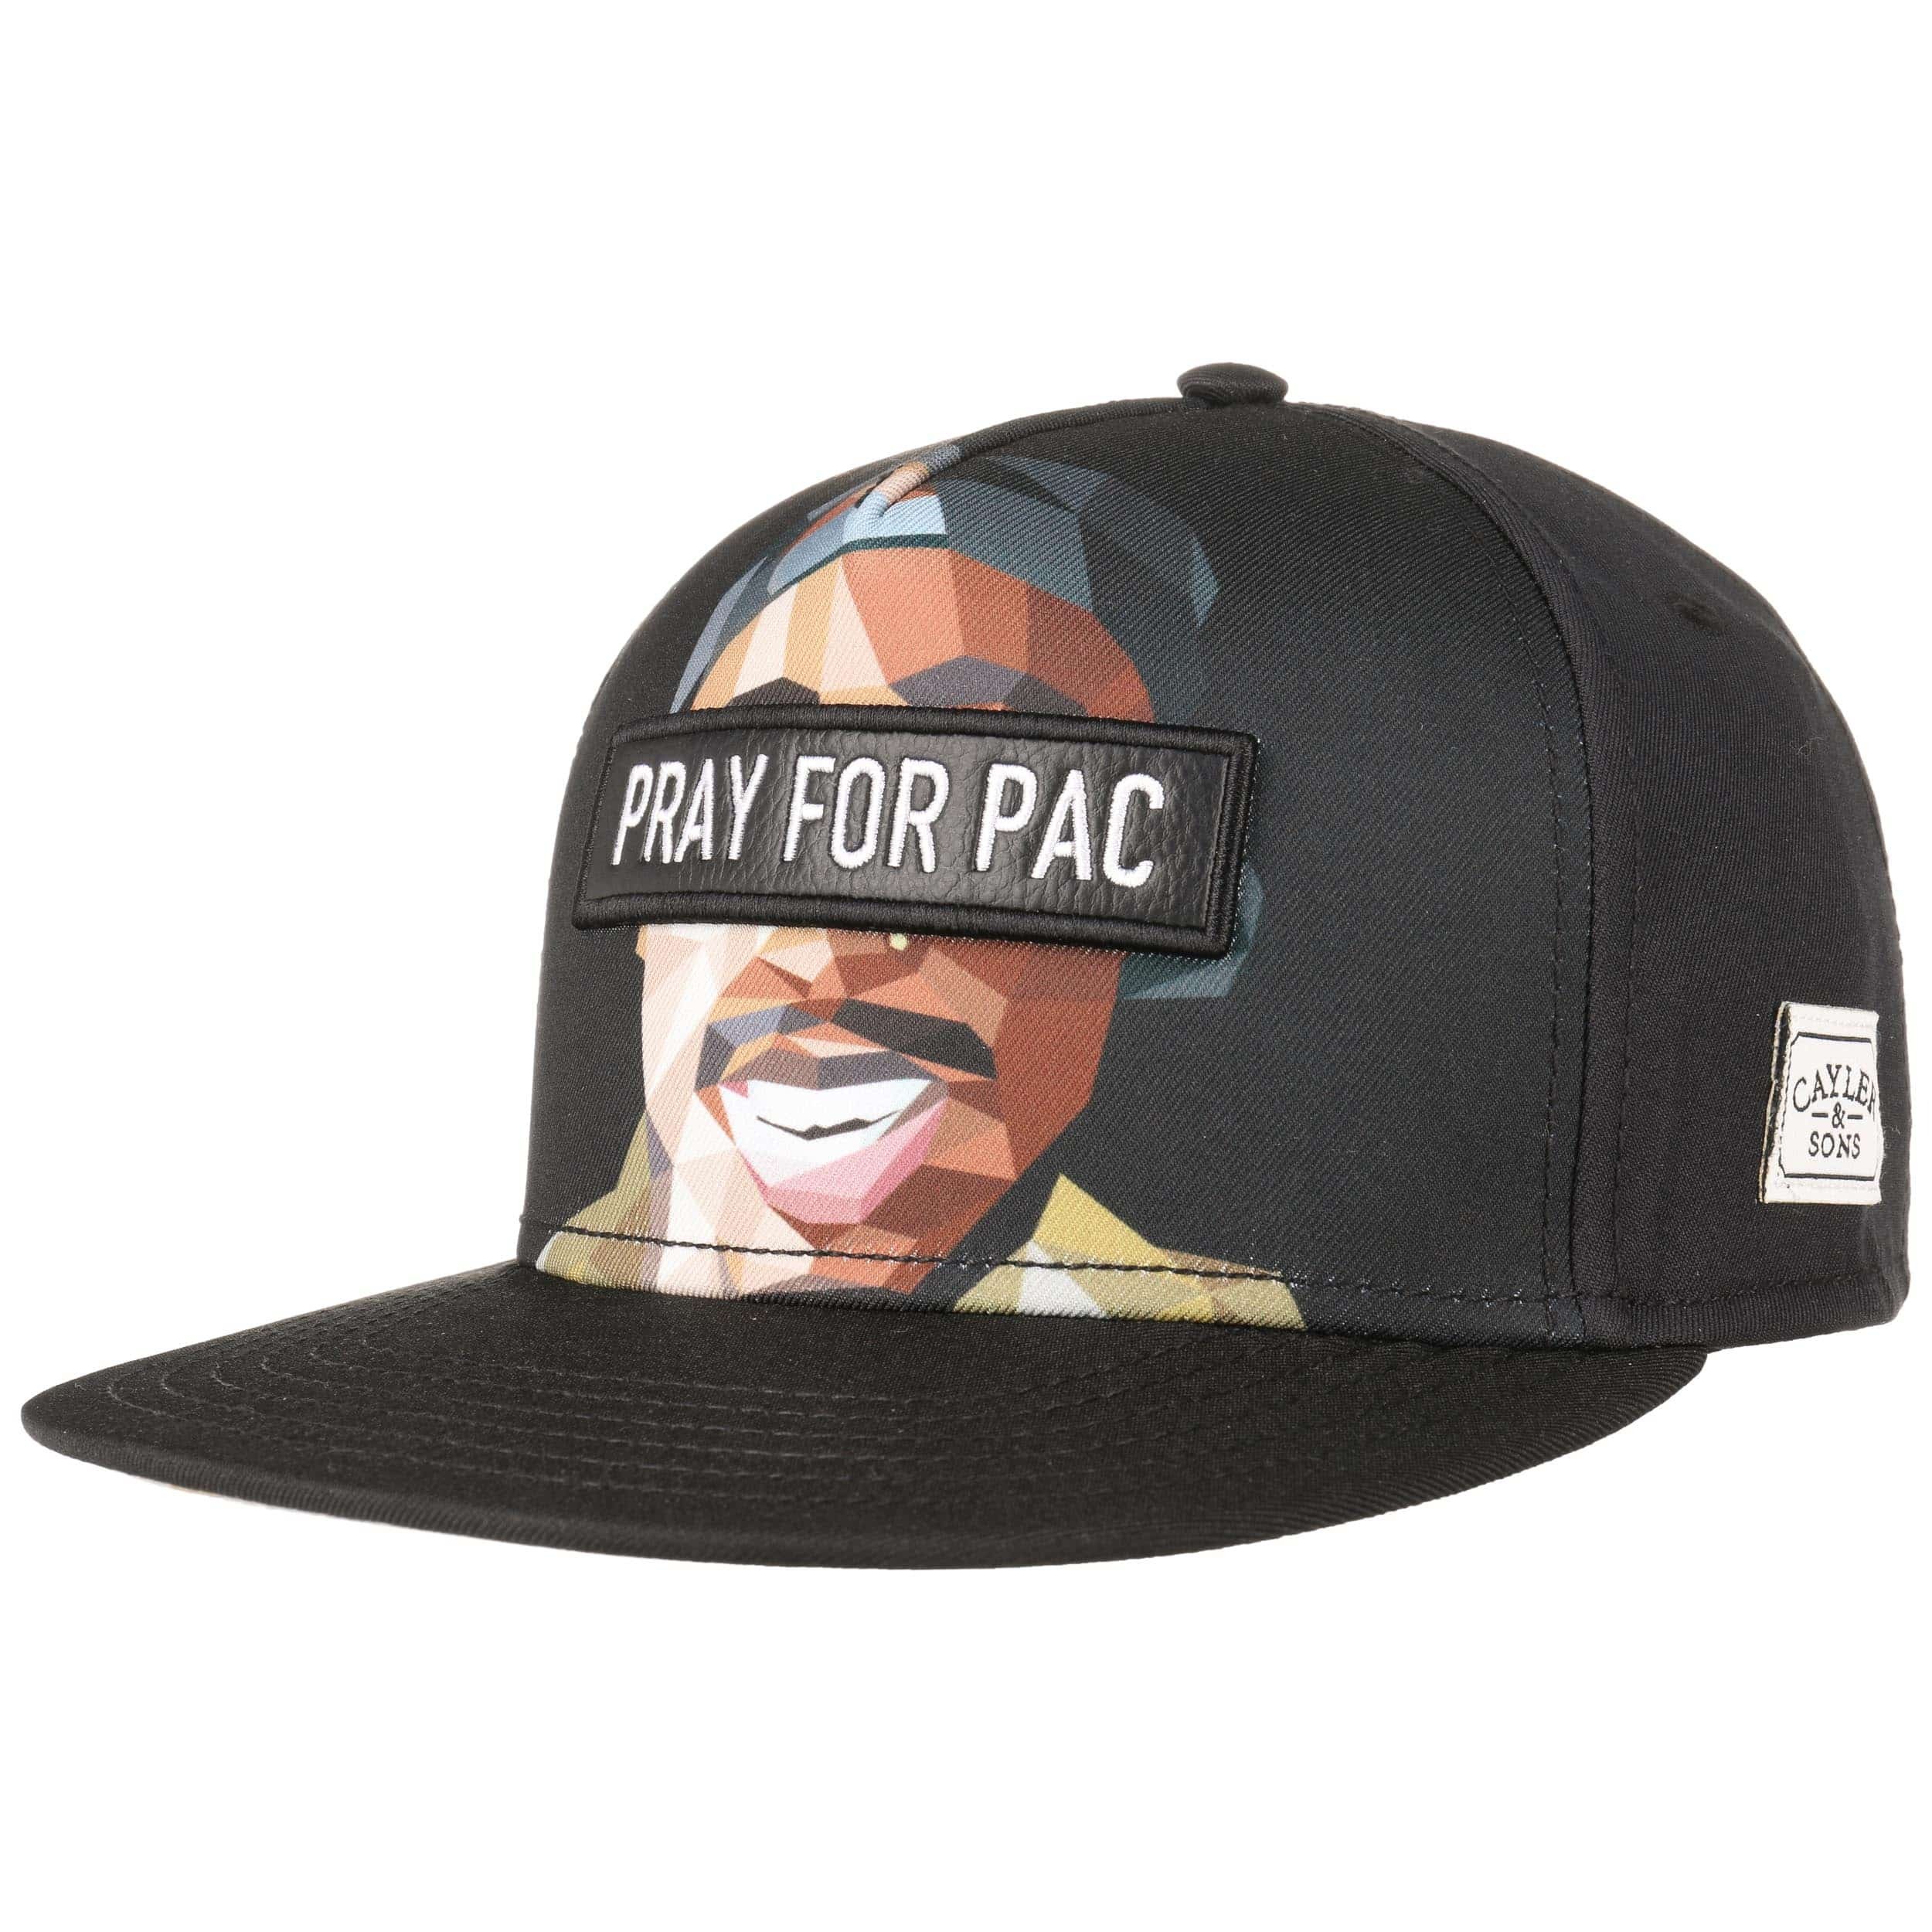 37,95 - & by Sons Pacasso Cap Cayler € Snapback